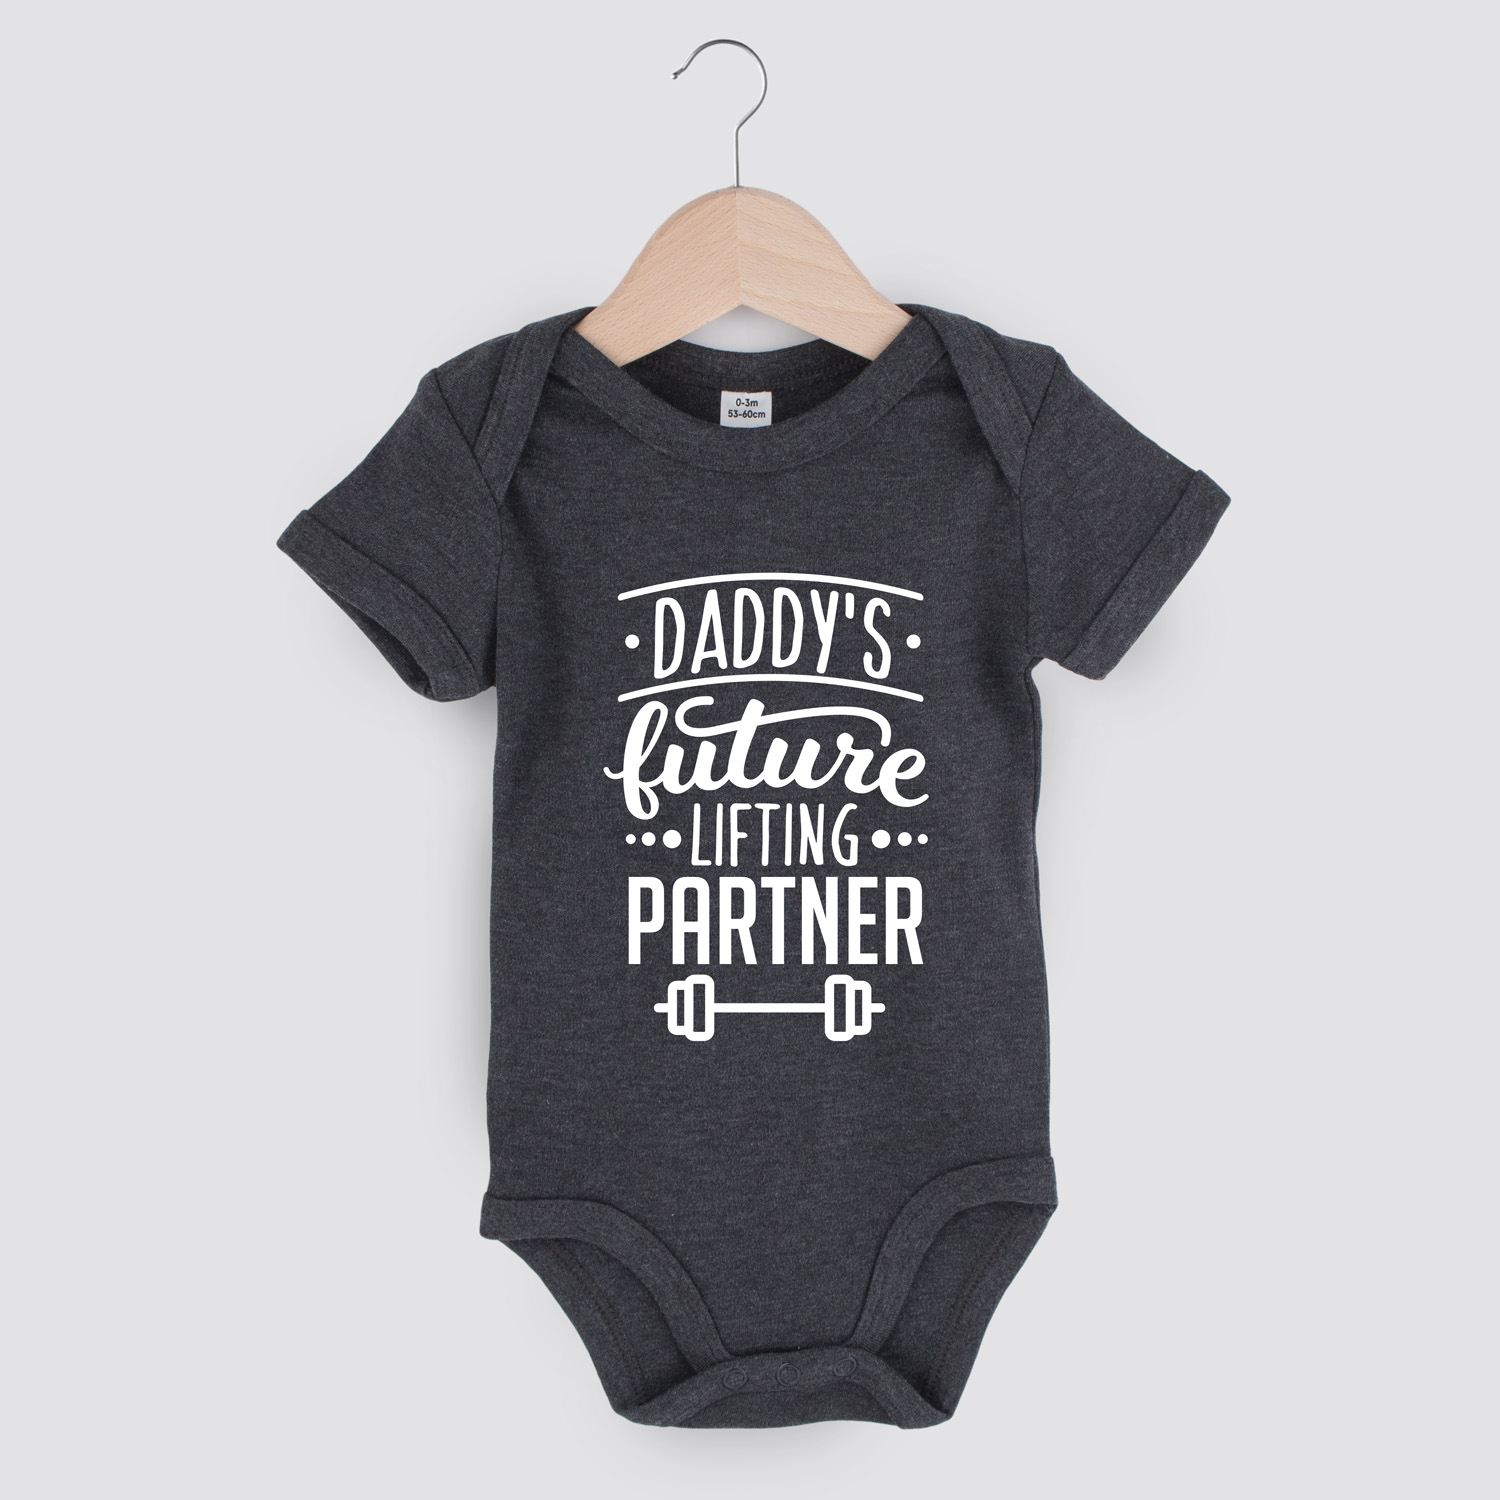 Daddy's future lifting partner | Baby romper | my fabulous life.